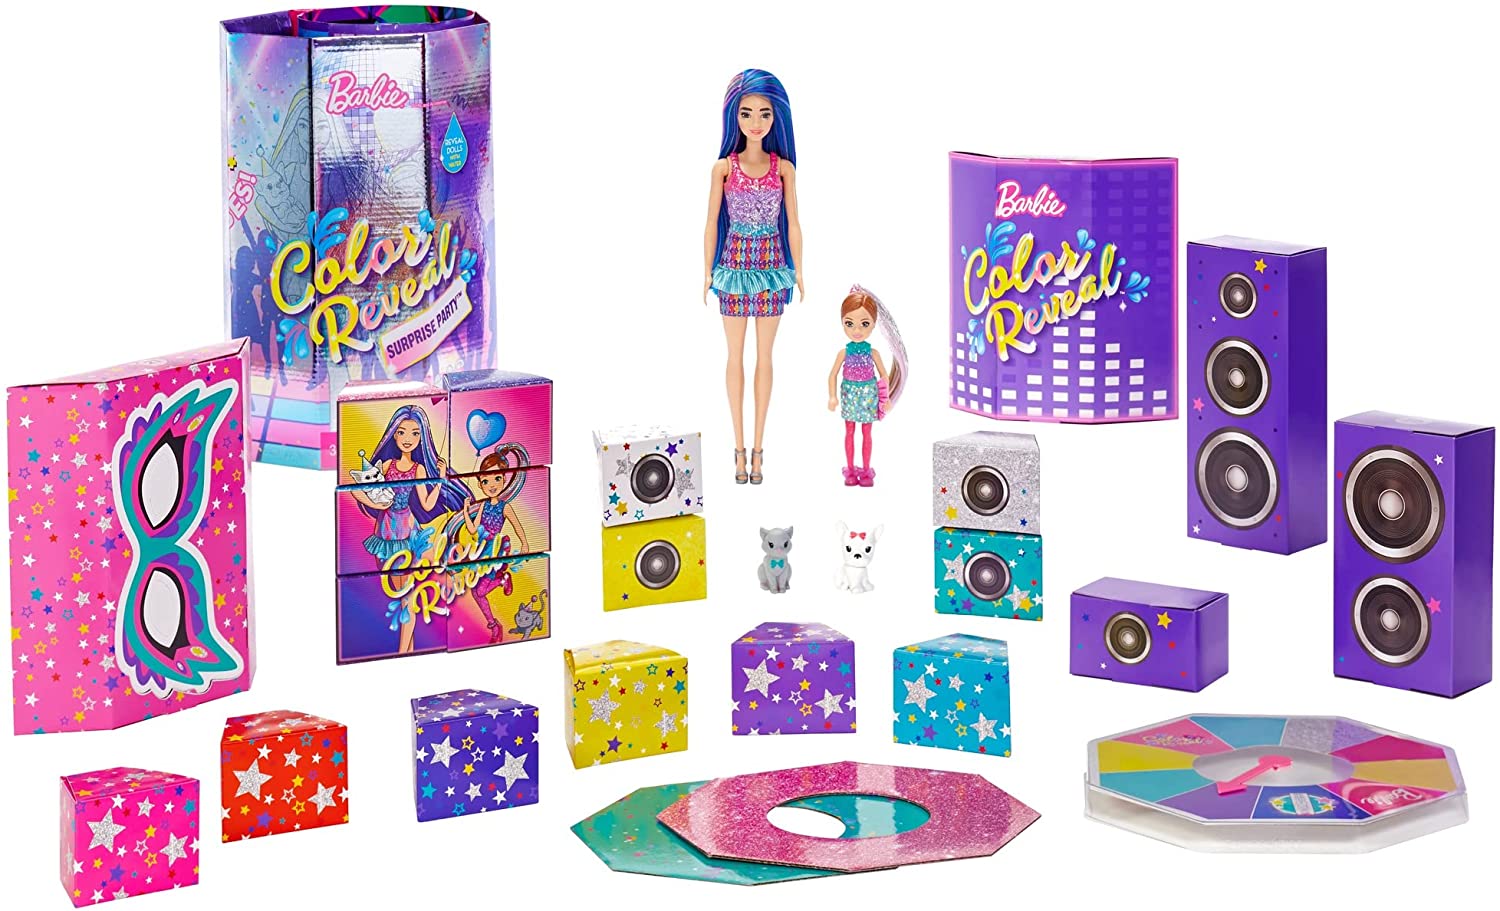 Barbie Color Reveal Surprise Party Set w/ 50+ Surprises $19.96 + Free Store Pickup at Macy's or F/S on Orders $25+